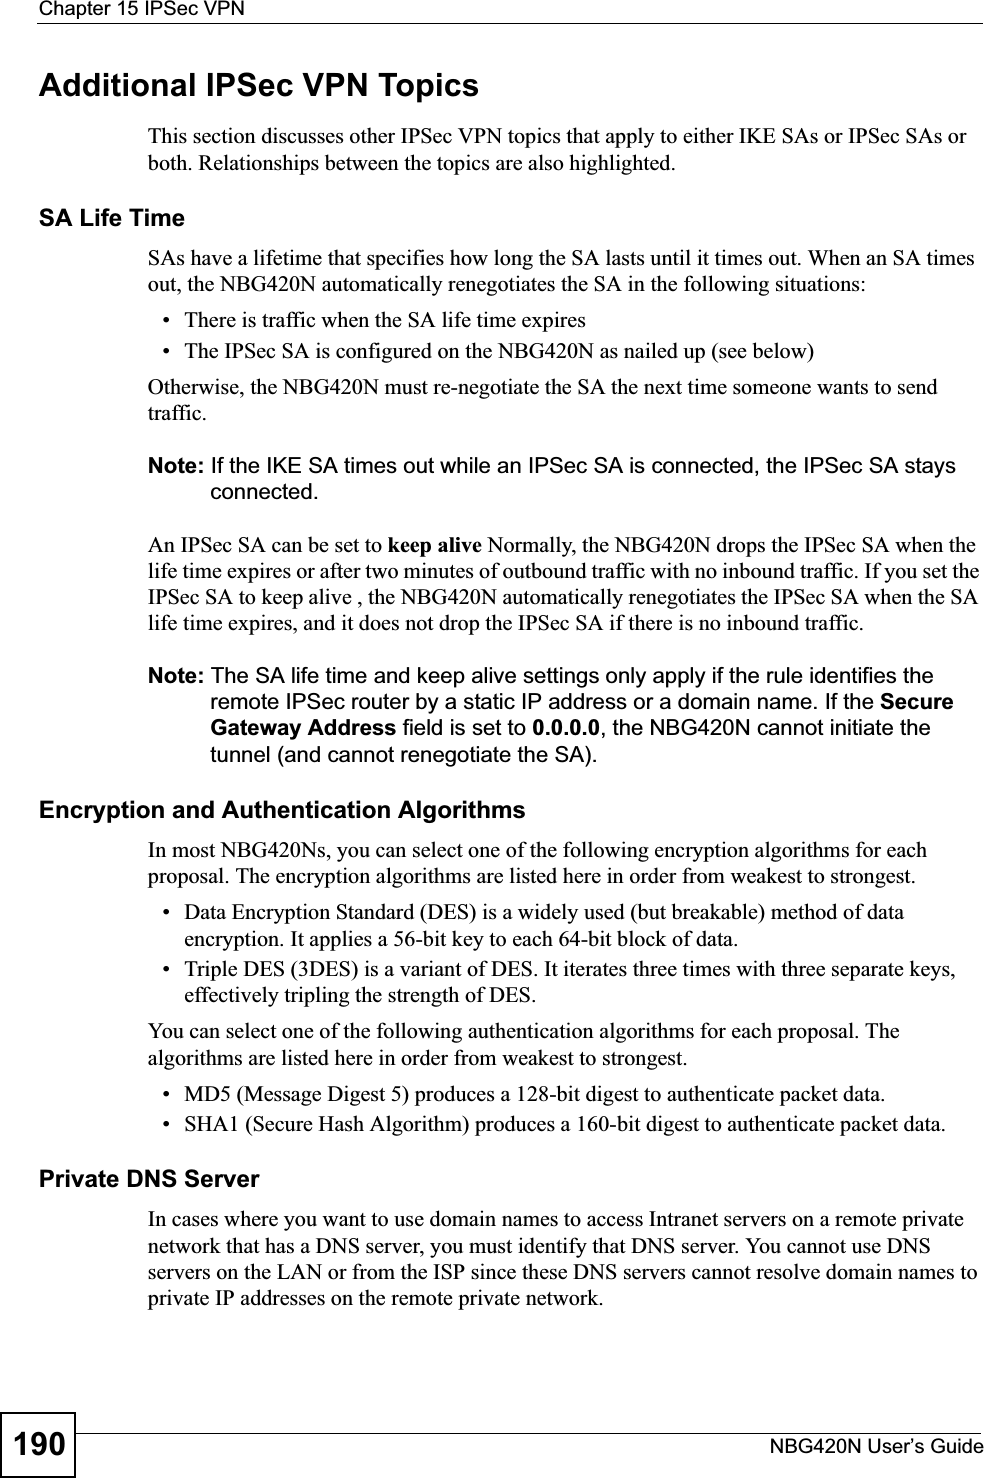 Chapter 15 IPSec VPNNBG420N User’s Guide190Additional IPSec VPN TopicsThis section discusses other IPSec VPN topics that apply to either IKE SAs or IPSec SAs or both. Relationships between the topics are also highlighted.SA Life TimeSAs have a lifetime that specifies how long the SA lasts until it times out. When an SA times out, the NBG420N automatically renegotiates the SA in the following situations:• There is traffic when the SA life time expires• The IPSec SA is configured on the NBG420N as nailed up (see below)Otherwise, the NBG420N must re-negotiate the SA the next time someone wants to send traffic.Note: If the IKE SA times out while an IPSec SA is connected, the IPSec SA stays connected.An IPSec SA can be set to keep alive Normally, the NBG420N drops the IPSec SA when the life time expires or after two minutes of outbound traffic with no inbound traffic. If you set the IPSec SA to keep alive , the NBG420N automatically renegotiates the IPSec SA when the SA life time expires, and it does not drop the IPSec SA if there is no inbound traffic.Note: The SA life time and keep alive settings only apply if the rule identifies the remote IPSec router by a static IP address or a domain name. If the Secure Gateway Address field is set to 0.0.0.0, the NBG420N cannot initiate the tunnel (and cannot renegotiate the SA).Encryption and Authentication AlgorithmsIn most NBG420Ns, you can select one of the following encryption algorithms for each proposal. The encryption algorithms are listed here in order from weakest to strongest.• Data Encryption Standard (DES) is a widely used (but breakable) method of data encryption. It applies a 56-bit key to each 64-bit block of data.• Triple DES (3DES) is a variant of DES. It iterates three times with three separate keys, effectively tripling the strength of DES.You can select one of the following authentication algorithms for each proposal. The algorithms are listed here in order from weakest to strongest.• MD5 (Message Digest 5) produces a 128-bit digest to authenticate packet data.• SHA1 (Secure Hash Algorithm) produces a 160-bit digest to authenticate packet data.Private DNS ServerIn cases where you want to use domain names to access Intranet servers on a remote private network that has a DNS server, you must identify that DNS server. You cannot use DNS servers on the LAN or from the ISP since these DNS servers cannot resolve domain names to private IP addresses on the remote private network.